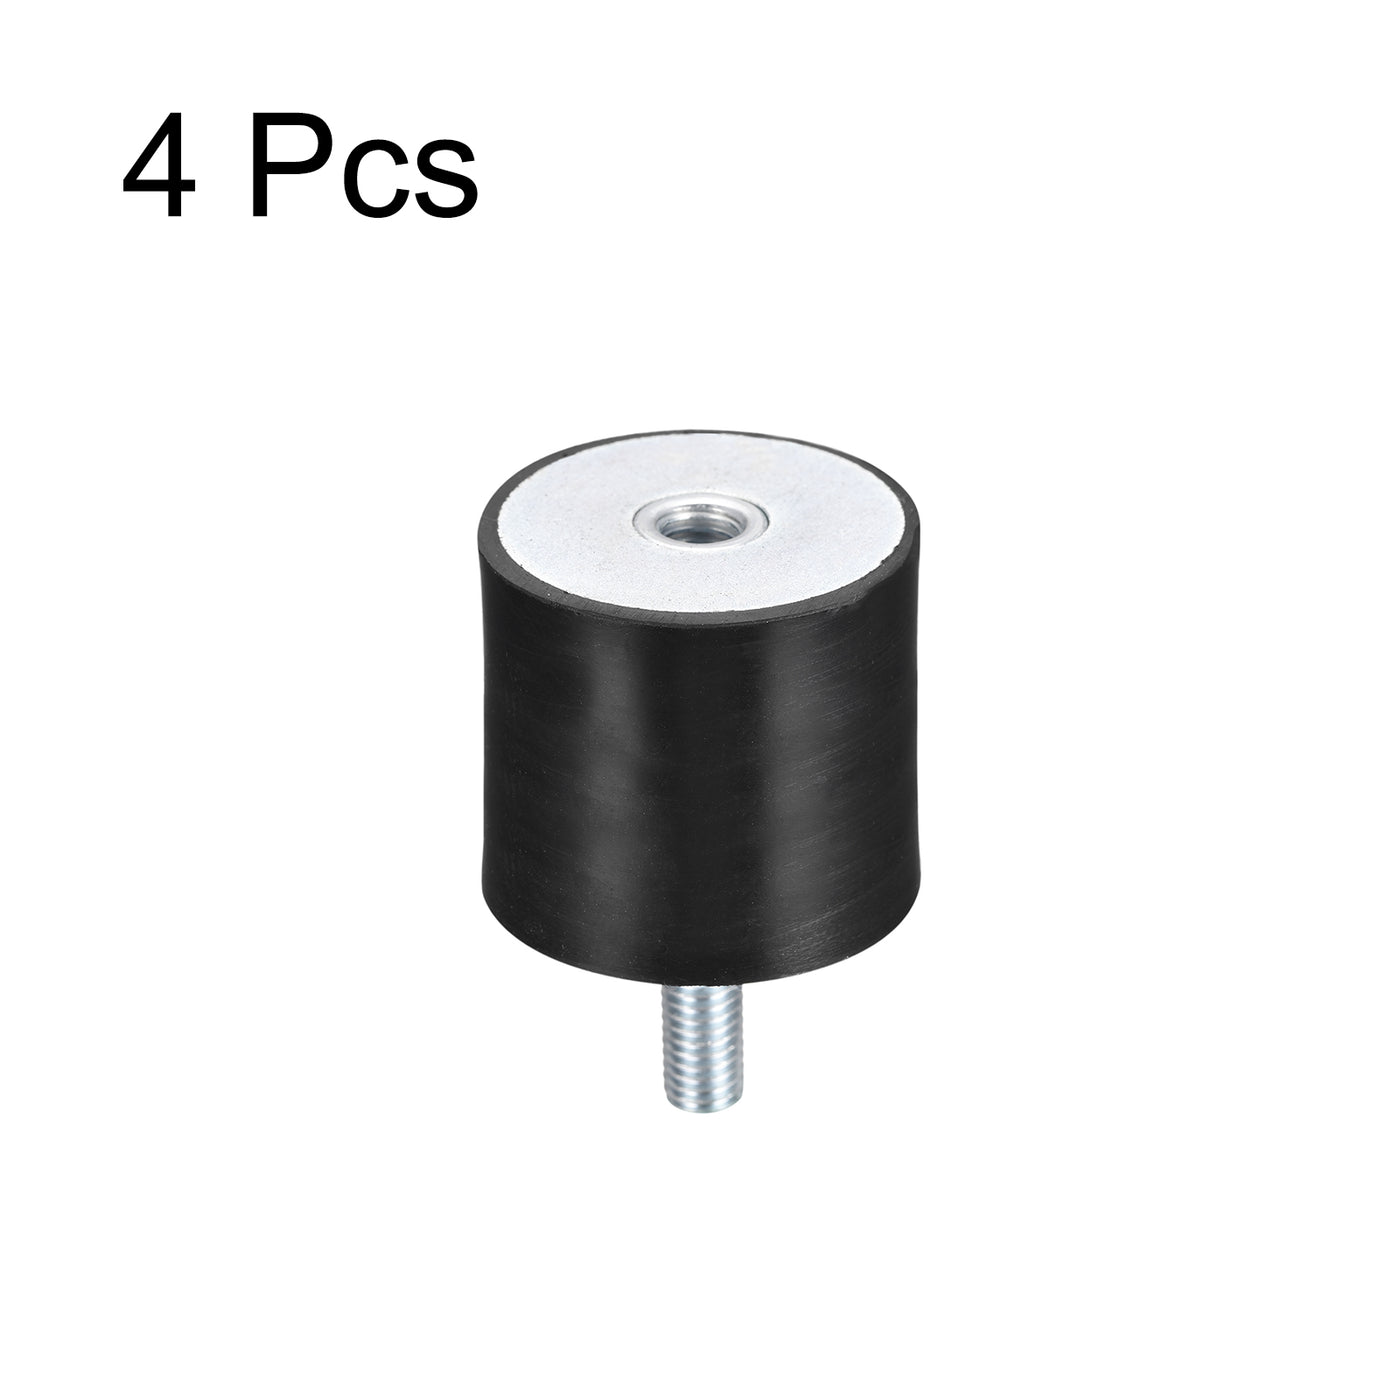 uxcell Uxcell Rubber Mount 4pcs M8 Male/Female Vibration Isolator Shock Absorber D40mmxH40mm